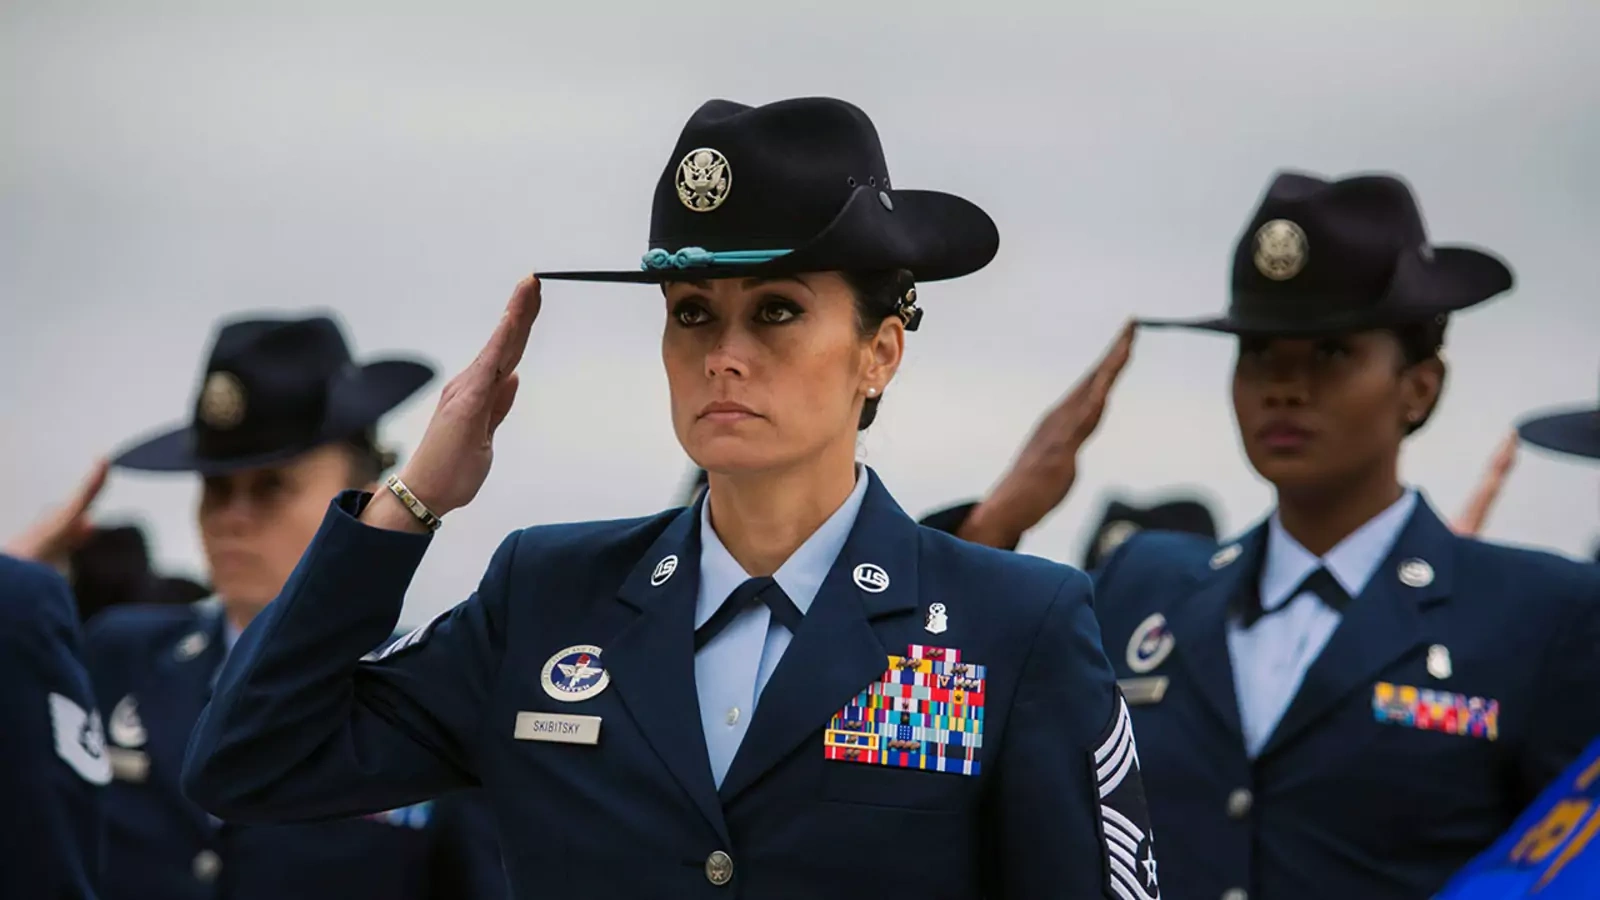 Today, women represent 16 percent of the enlisted forces and 19 percent of the officer corps.